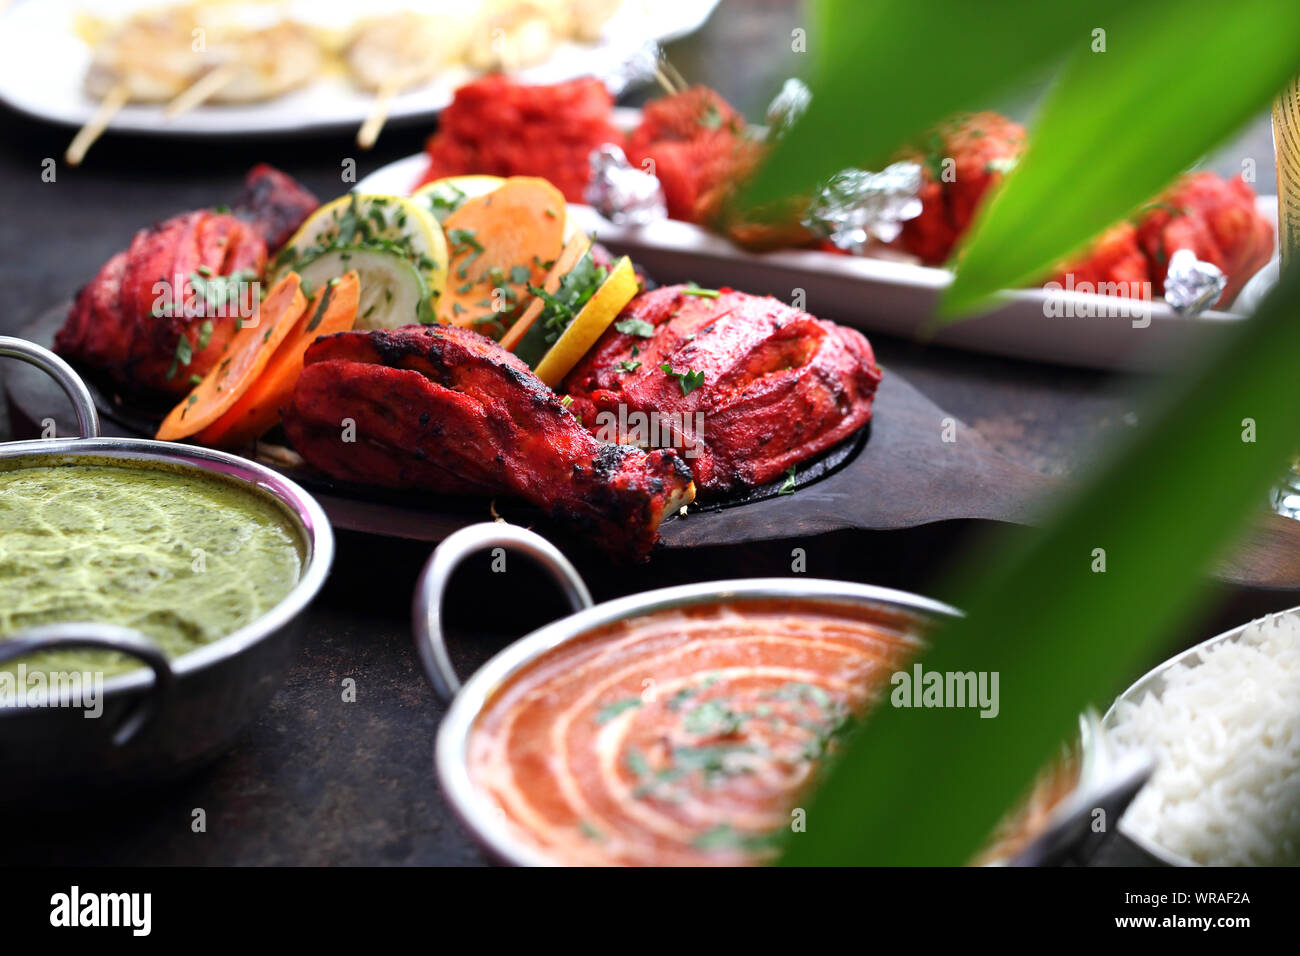 Indian cuisine, aromatic curry dishes. Colorful dishes. Stock Photo